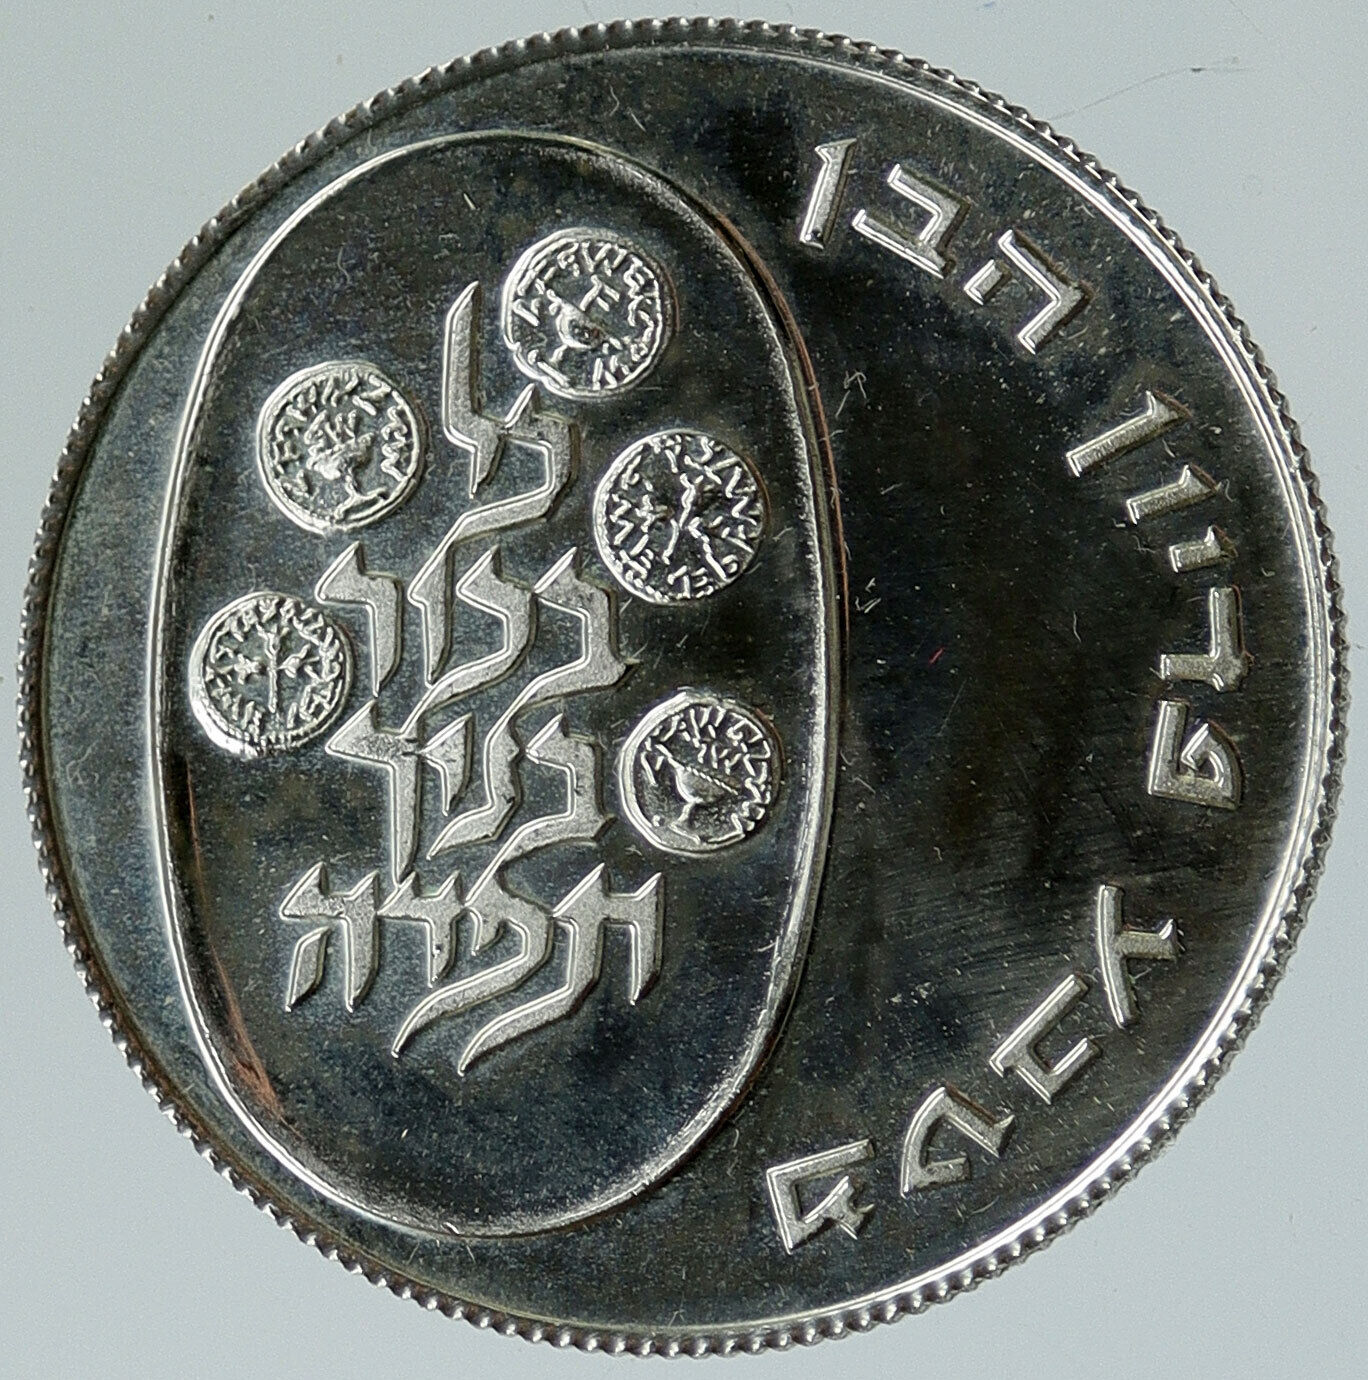 1973 ISRAEL Jewish Firstborn PIDYON HABEN Ceremony Proof Silver 10L Coin i116770